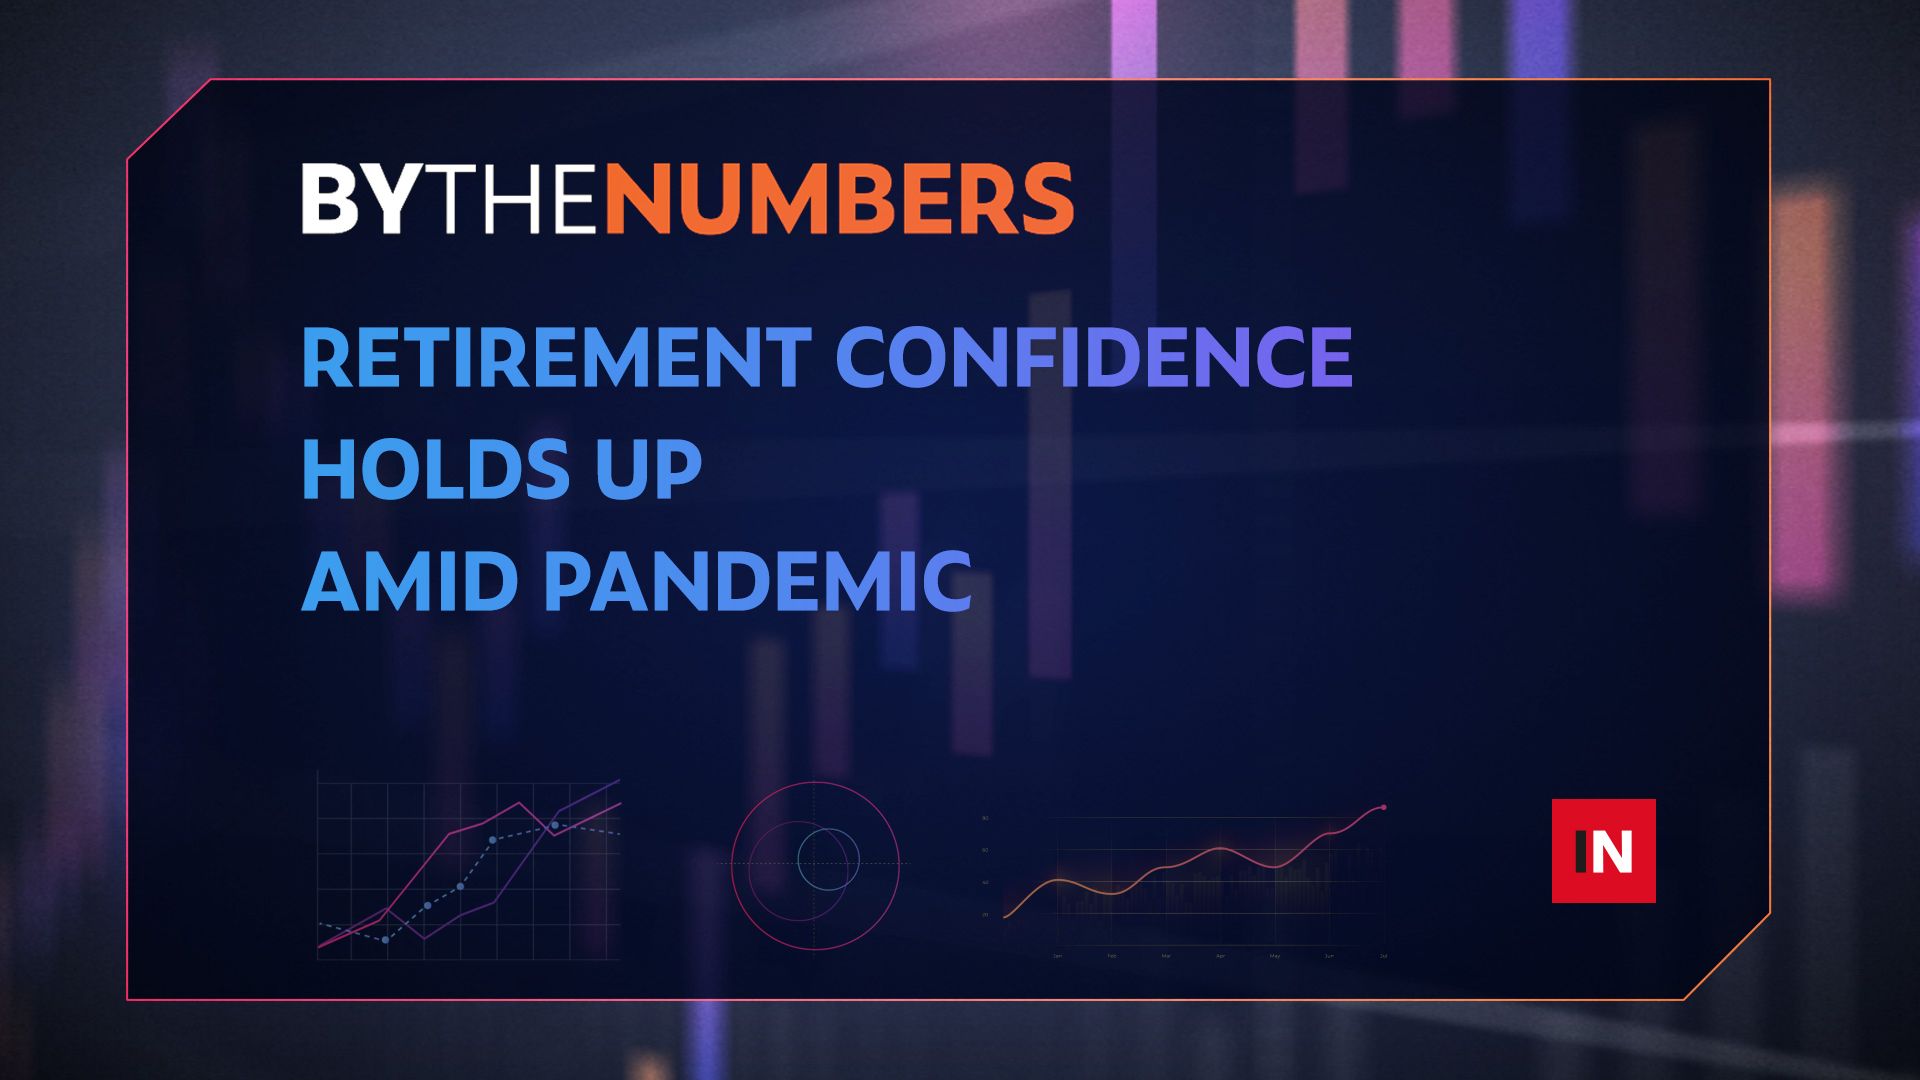 Retirement confidence holds up amid pandemic